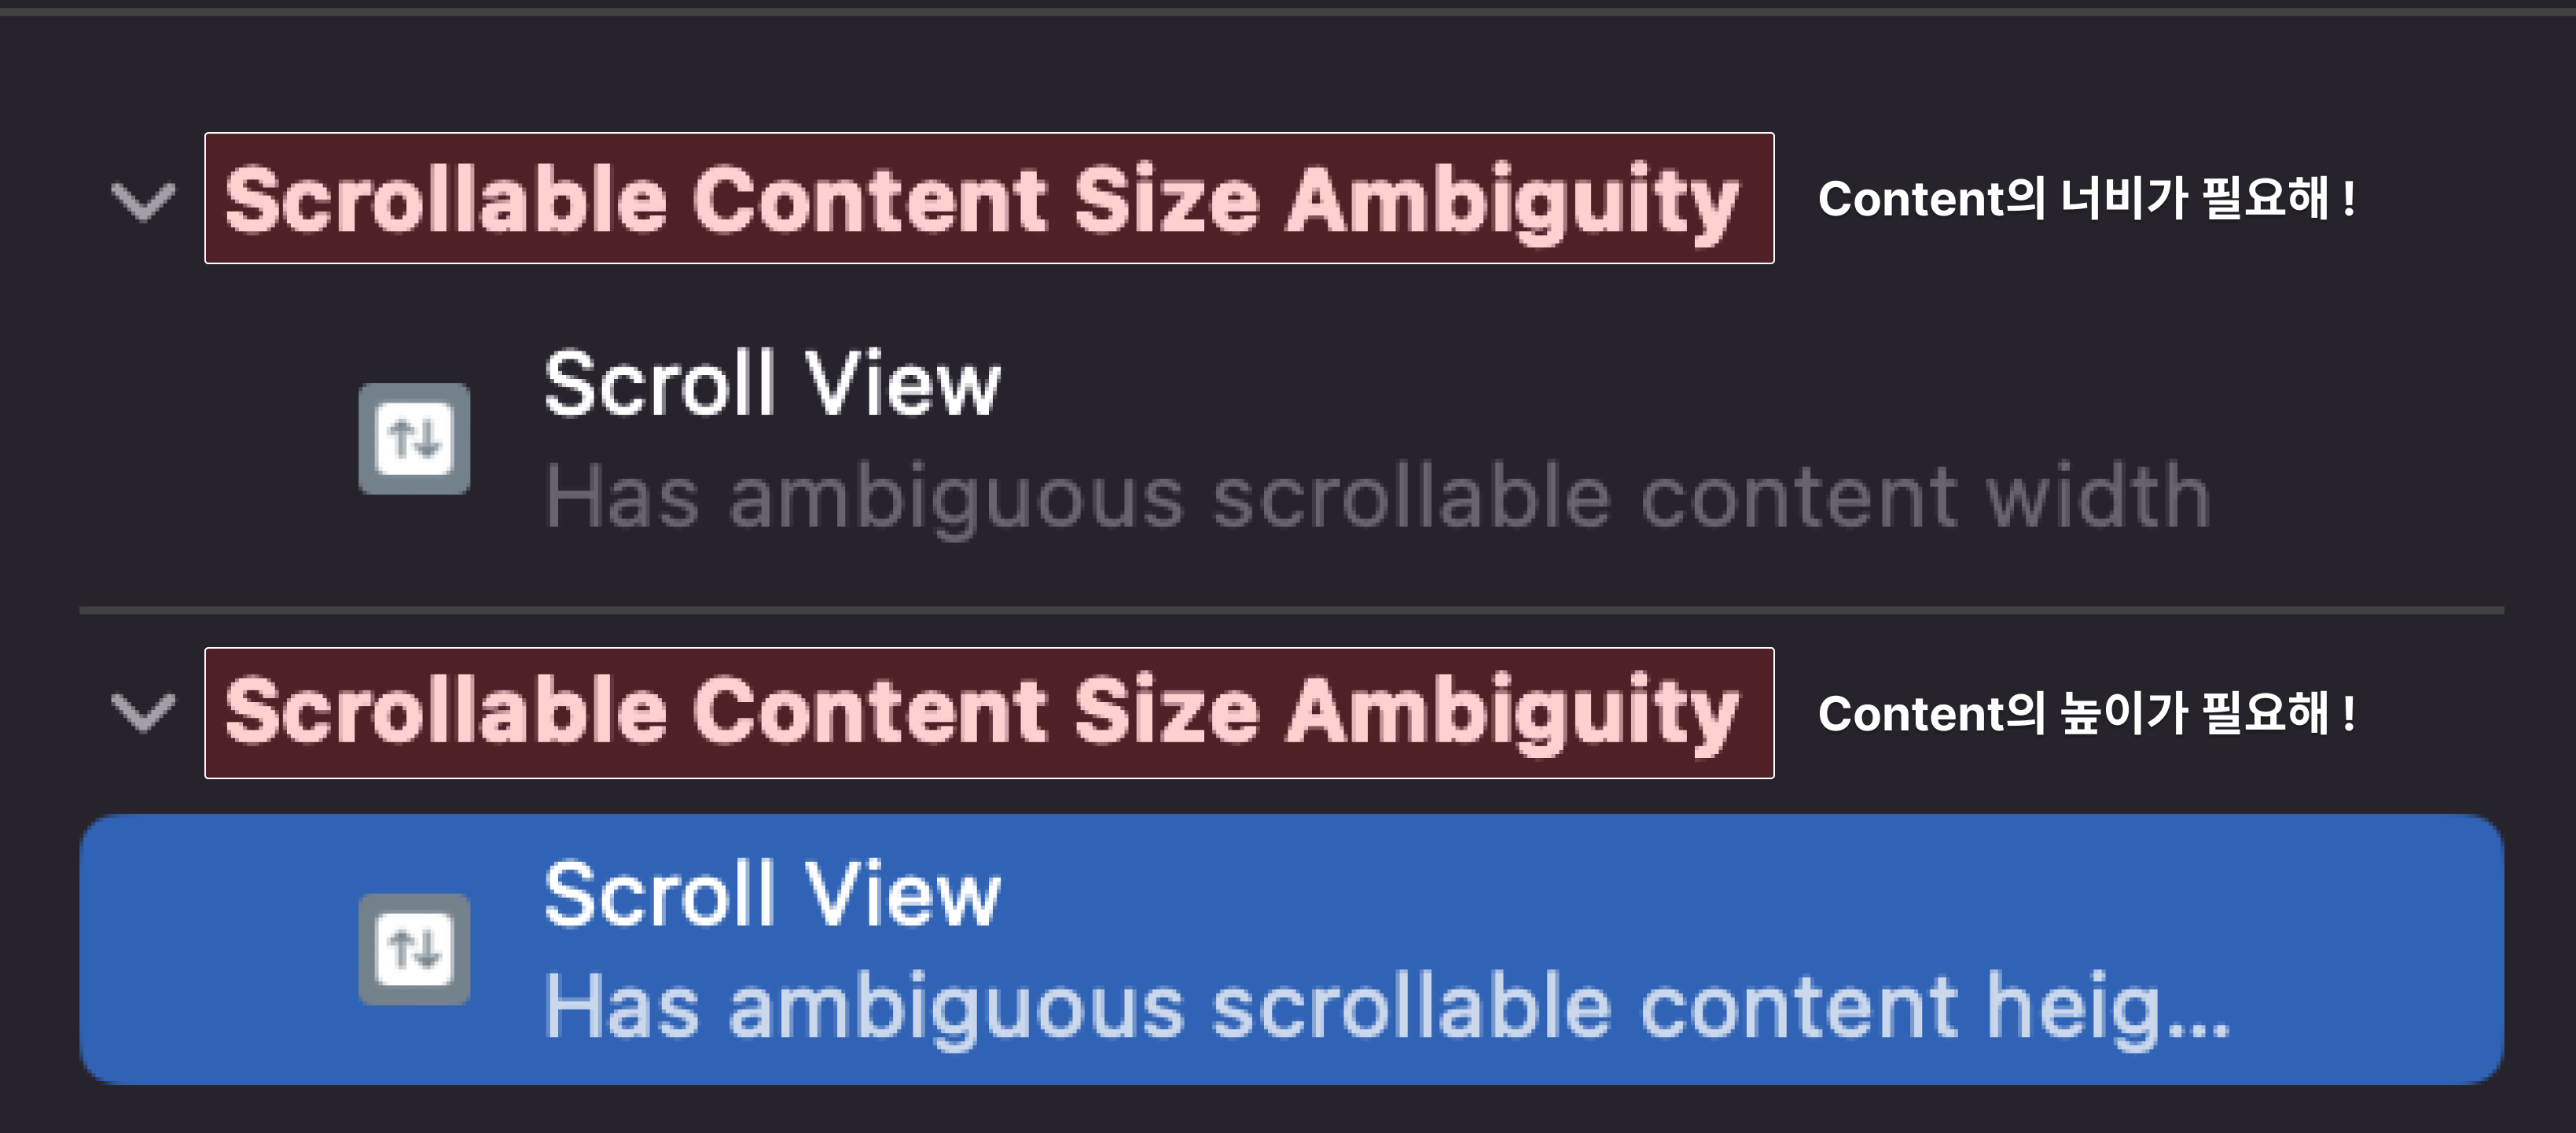 Scrollable Content Size Ambiguity Constraint 오류 메세지